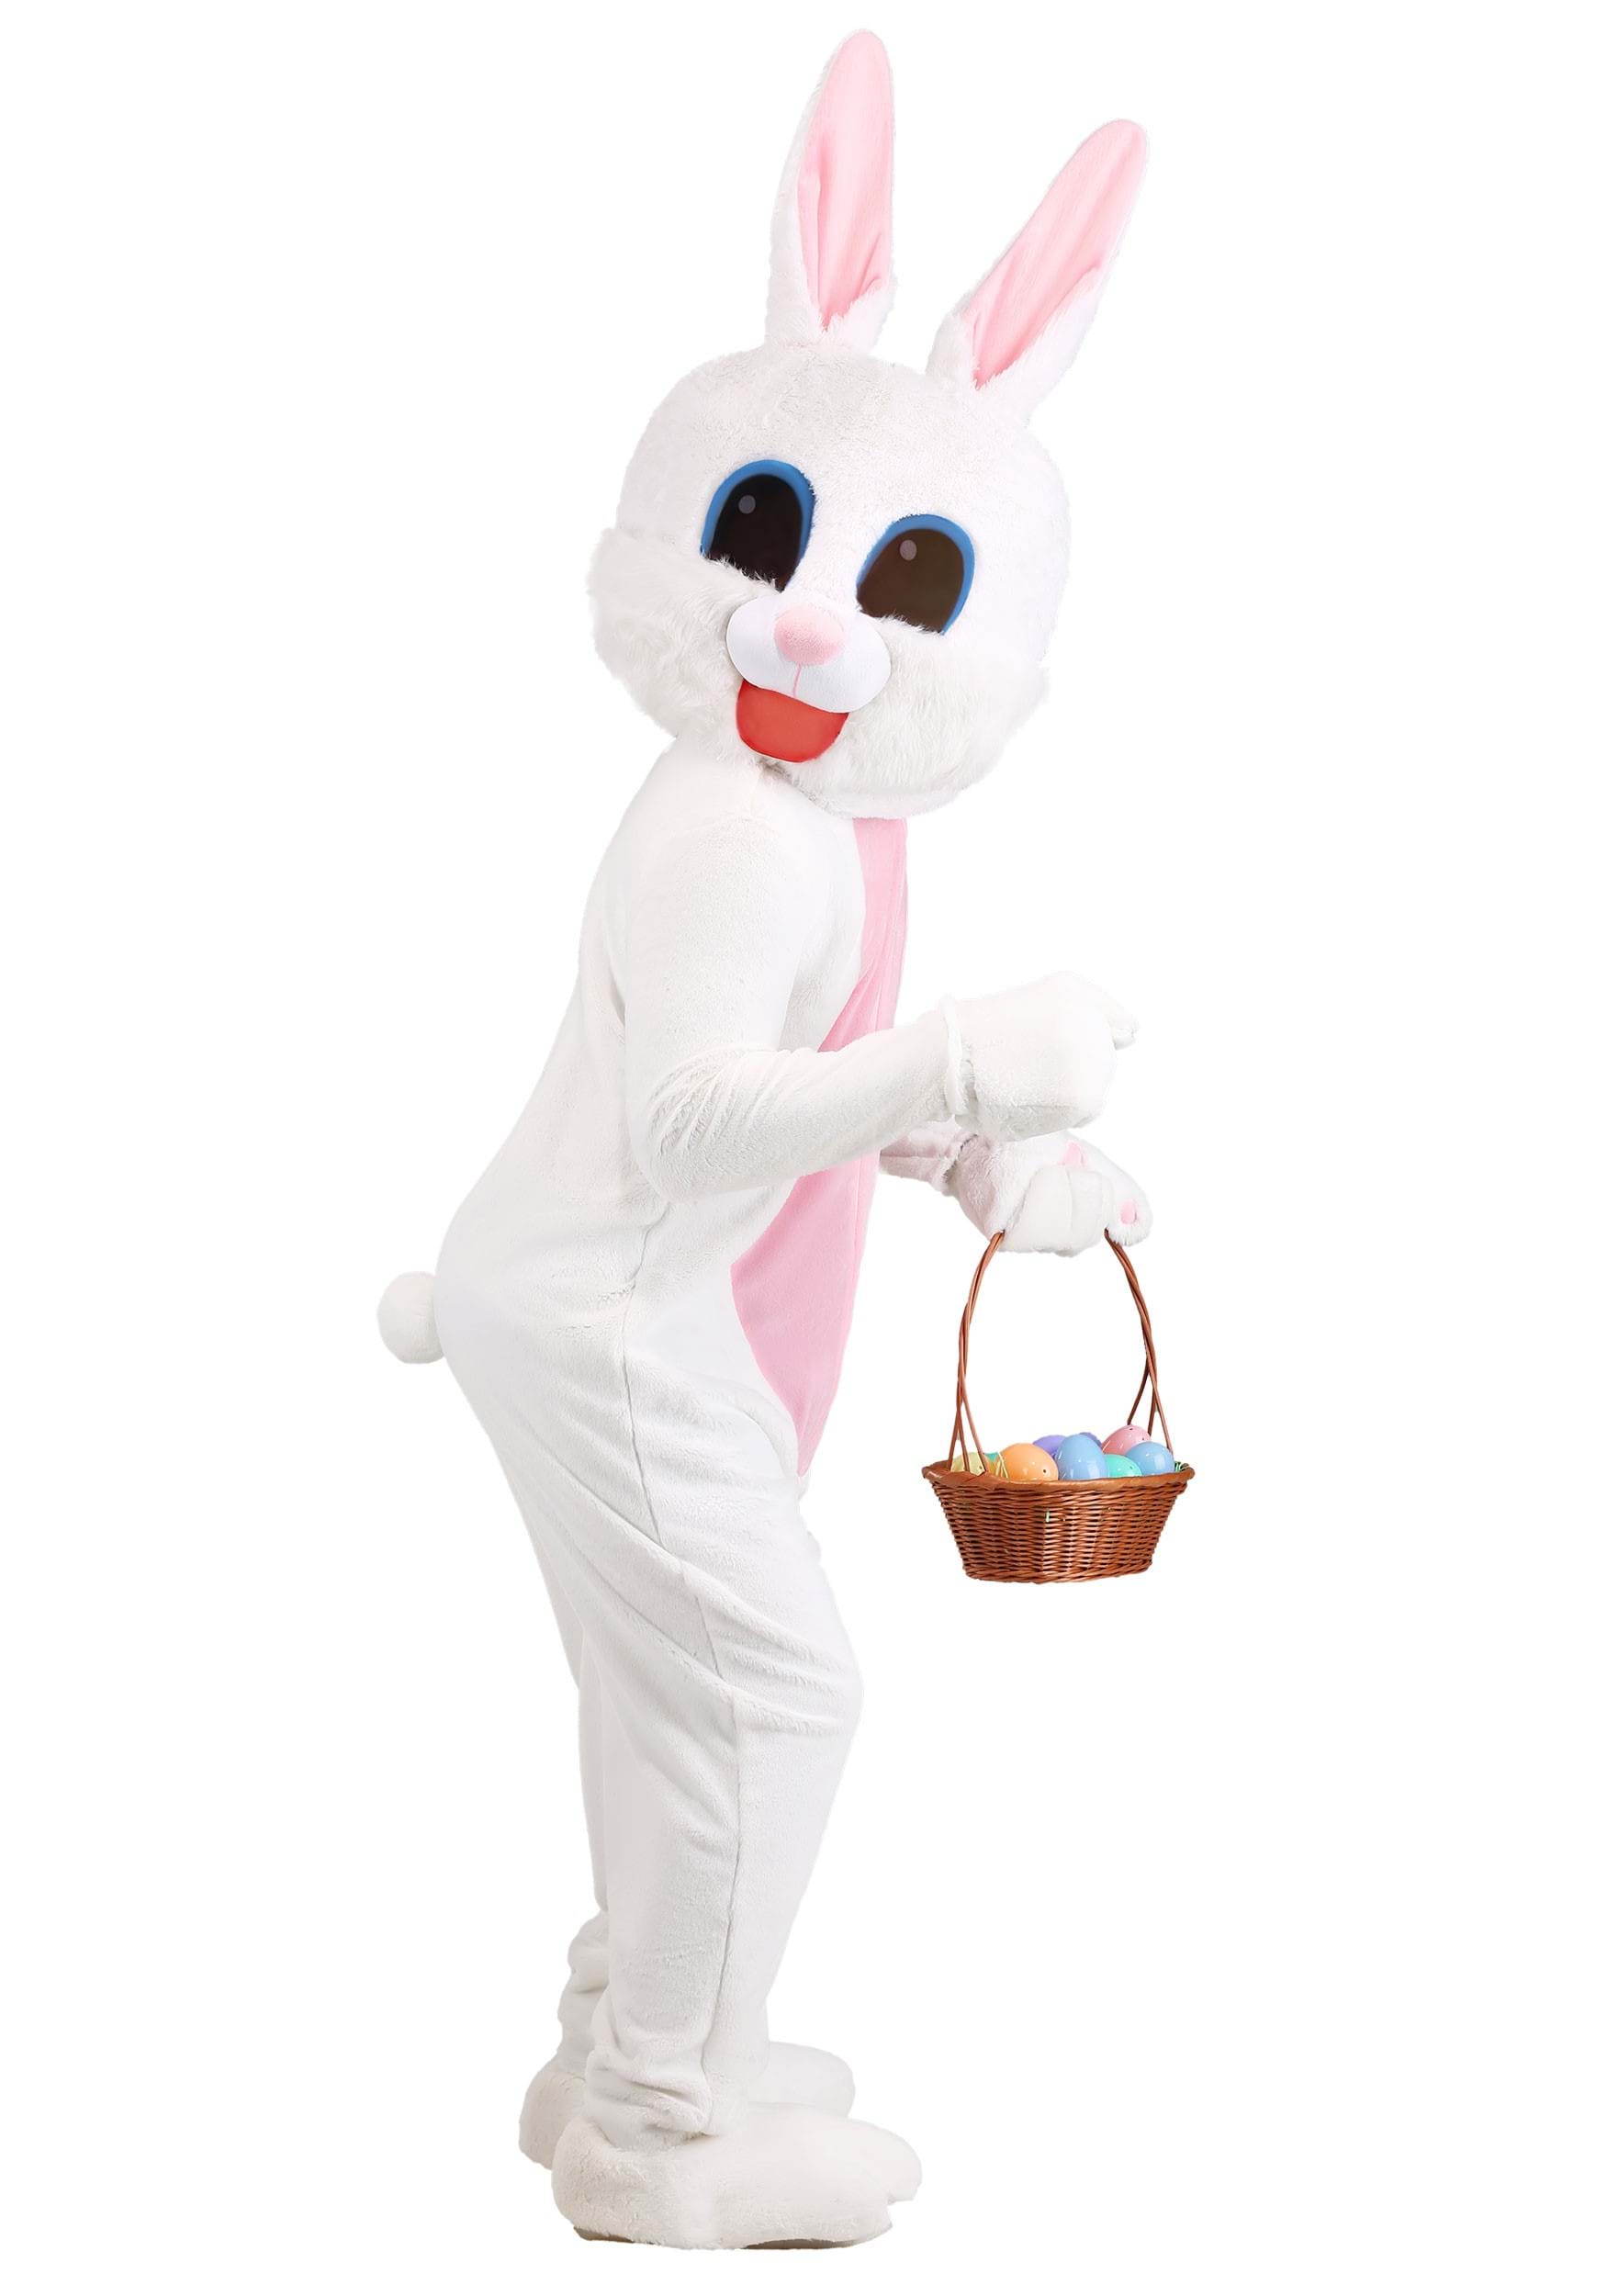 Plus Size Mascot Easter Bunny Costume For Adults